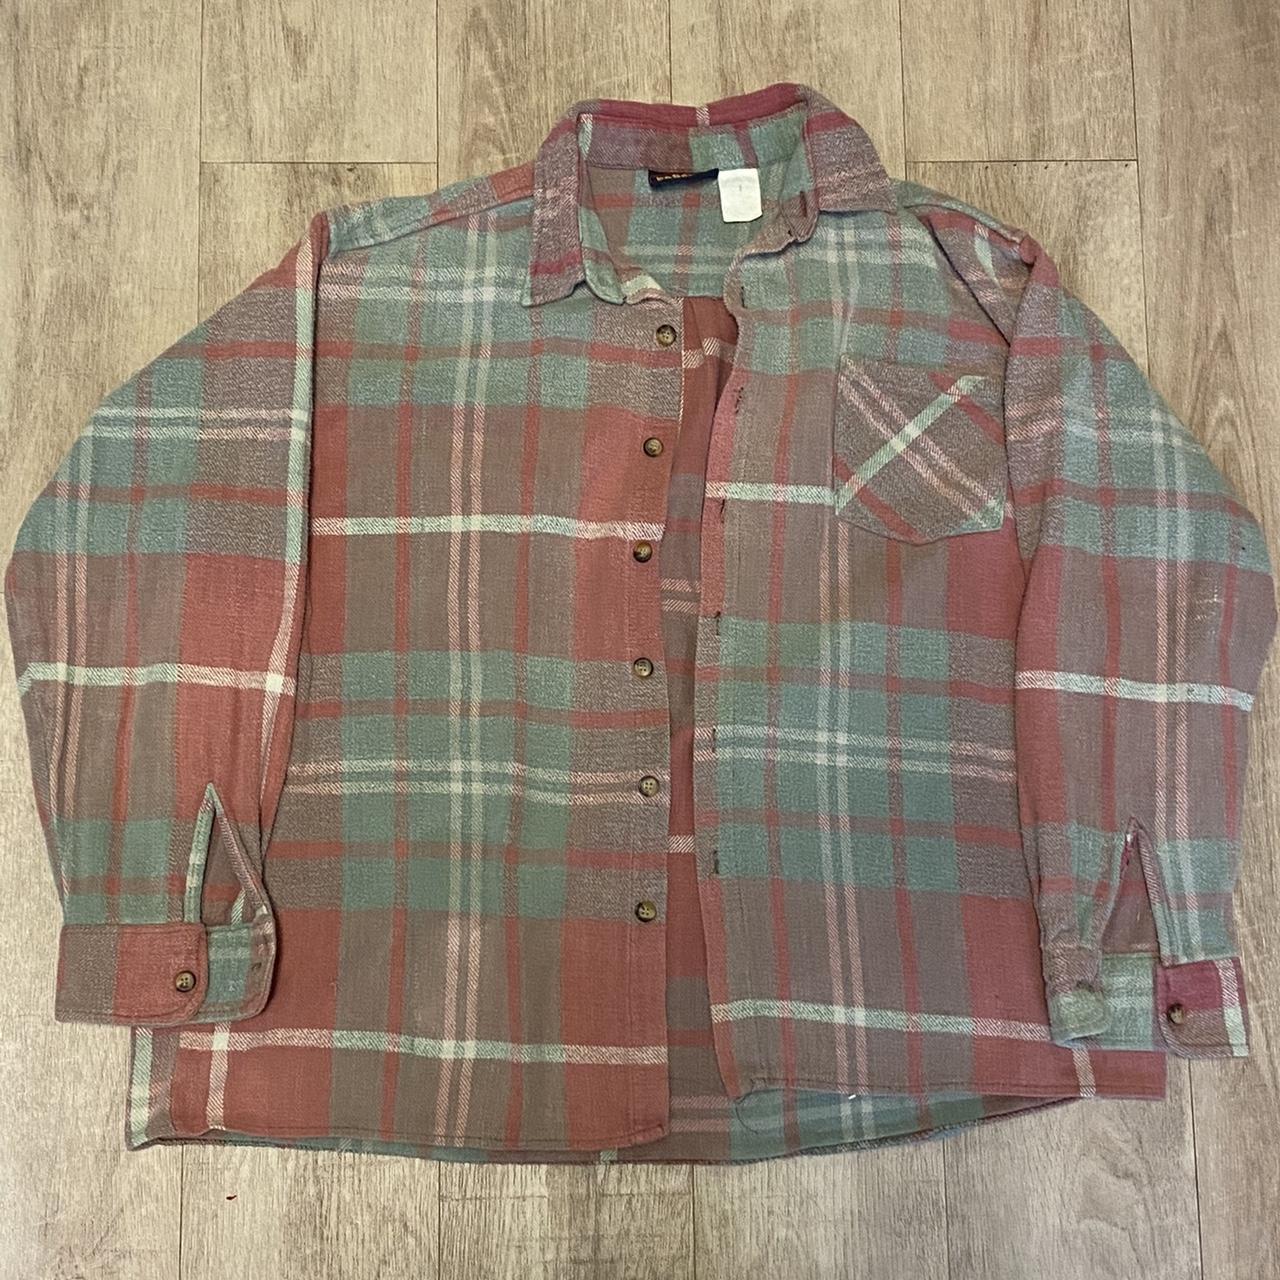 Vintage 80s wool button up faded glory Fits like a... - Depop